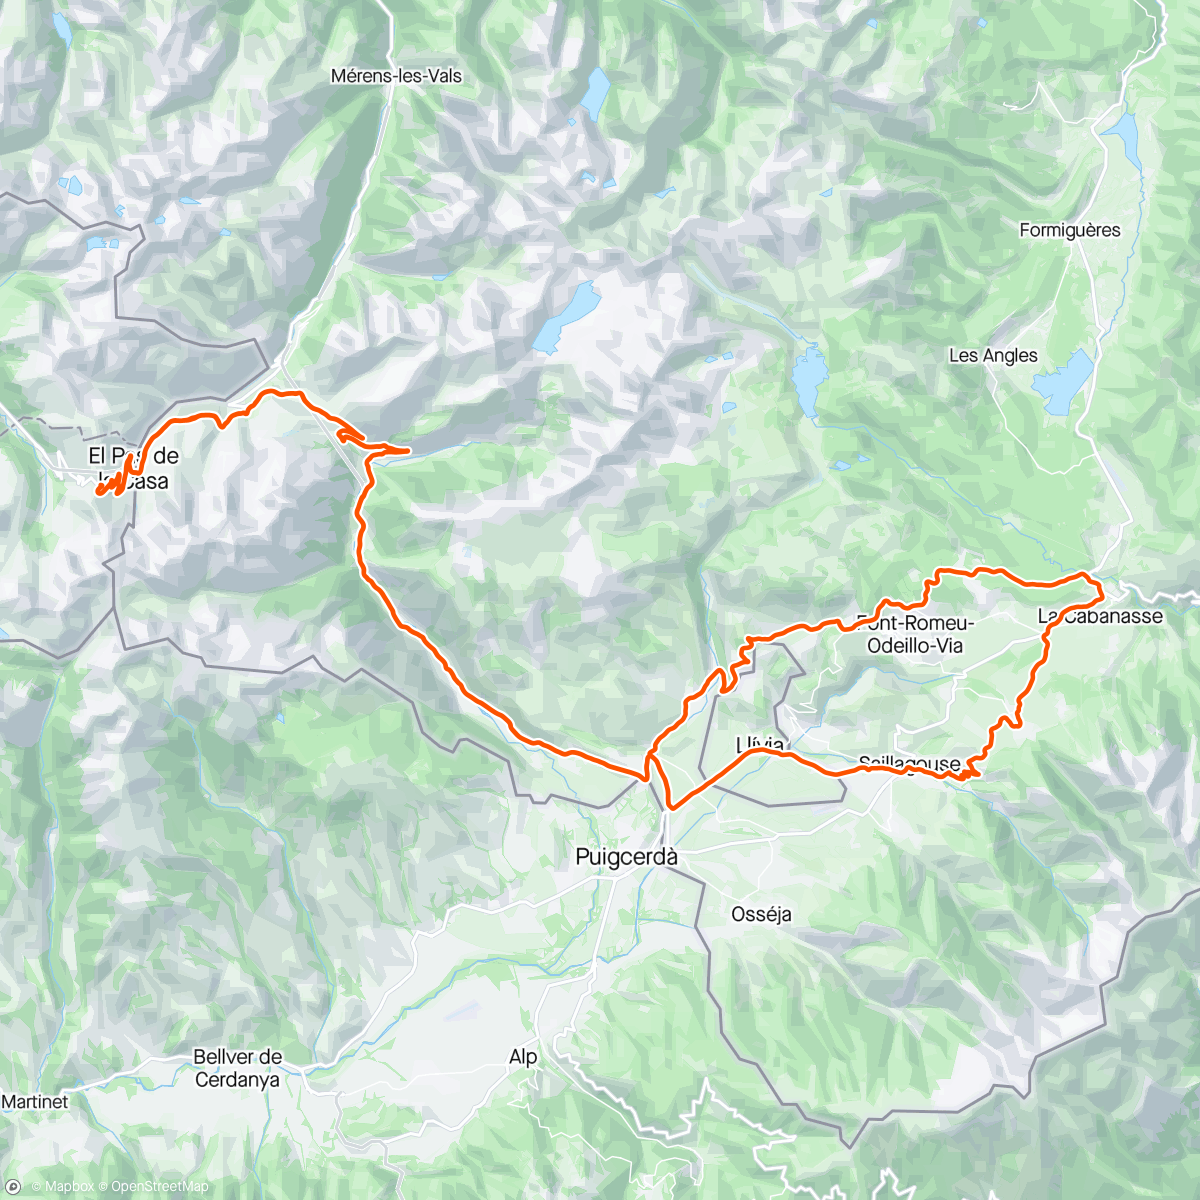 Map of the activity, Font Romeu area is so nice